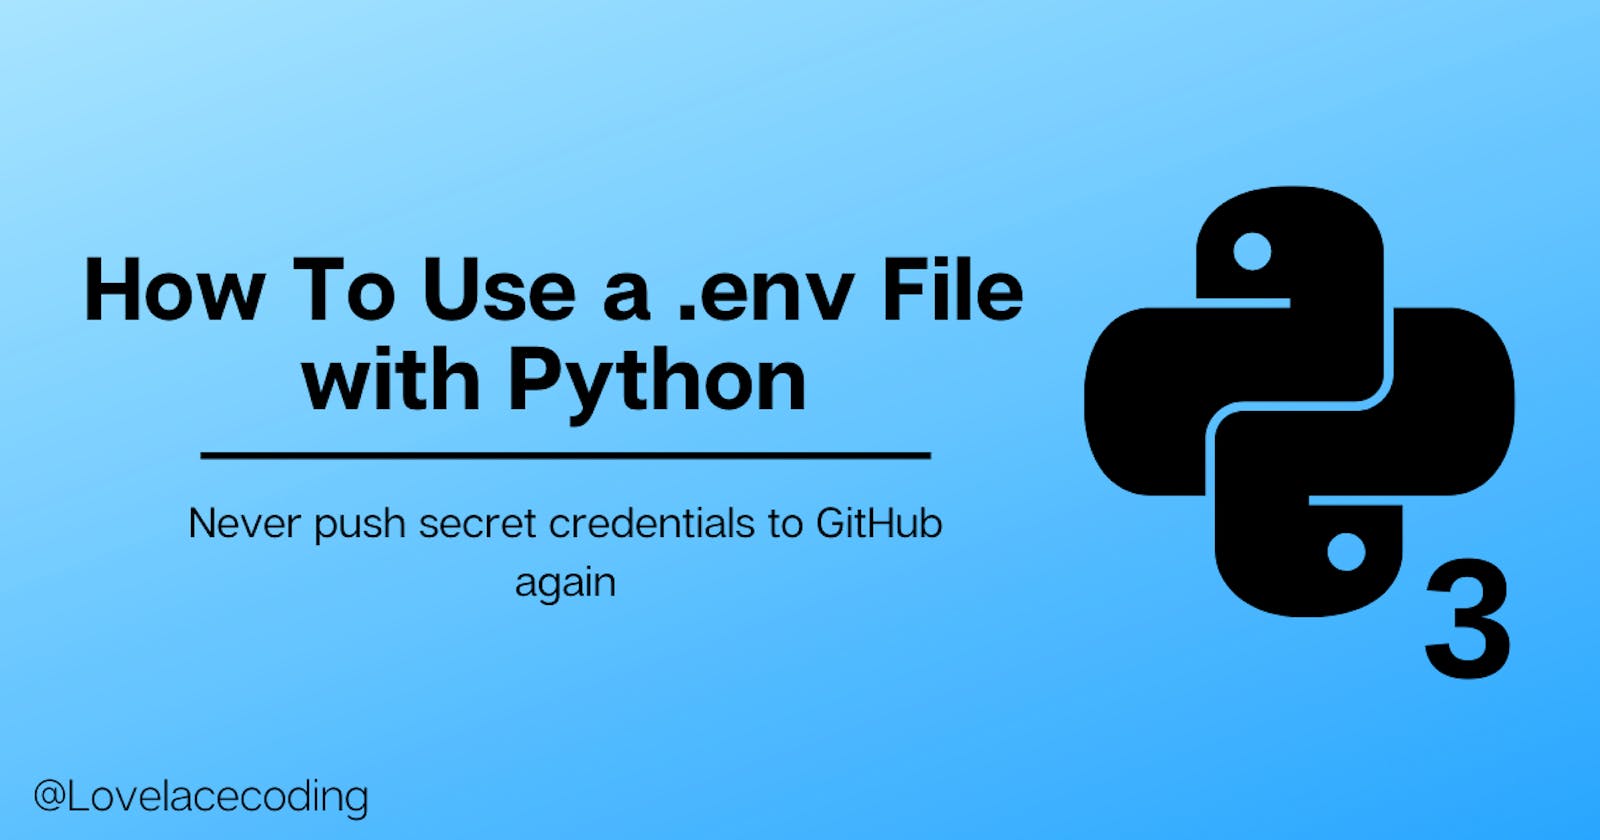 How To Use a .env File With Python